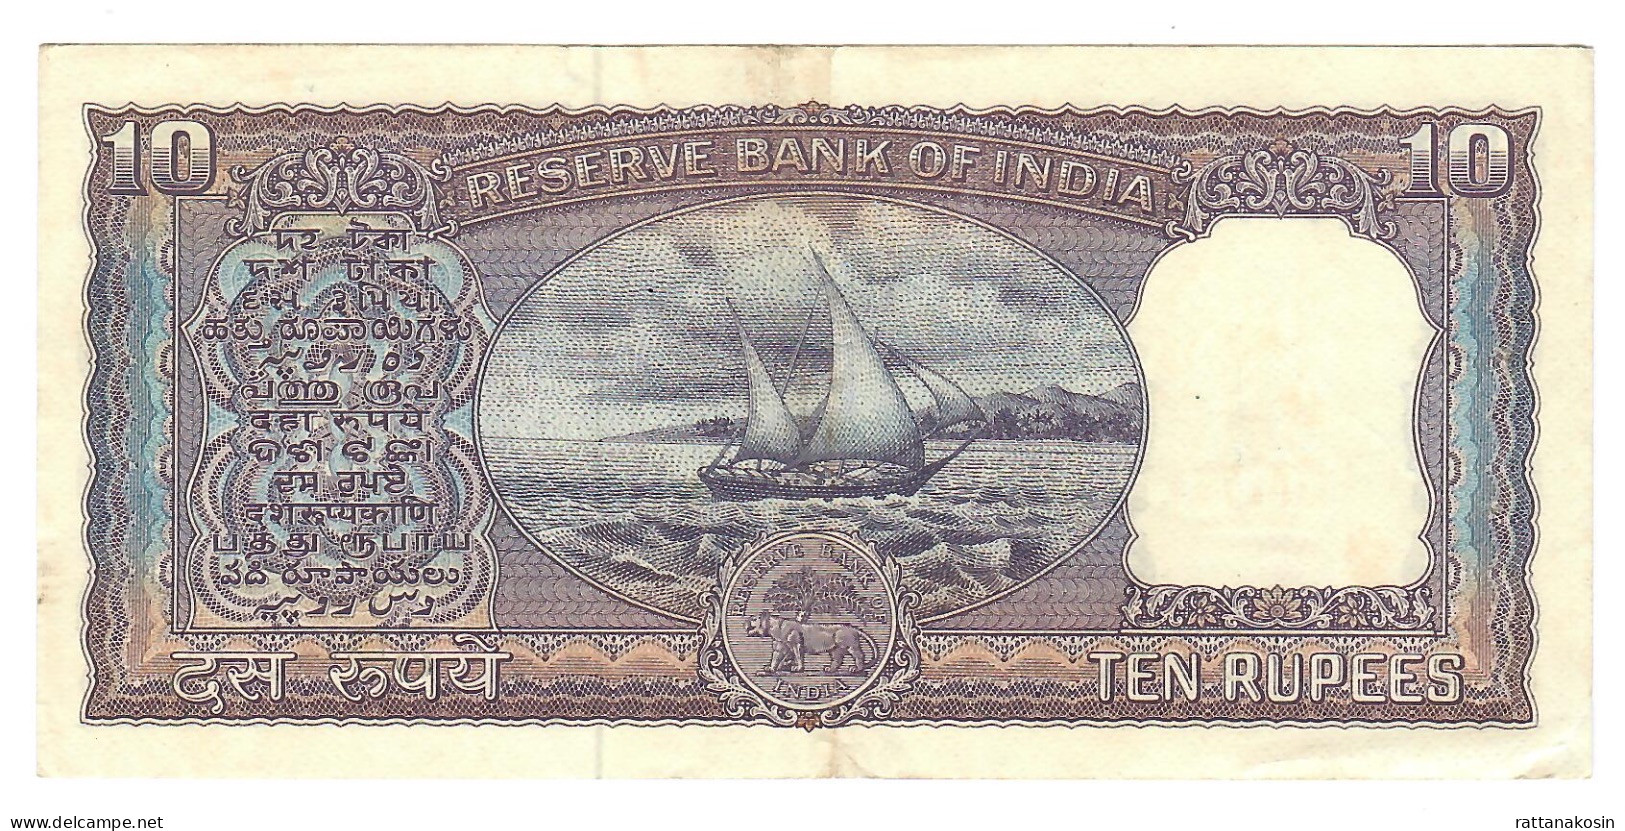 INDIA P57a  10 RUPEES 1967  Signature JHA    XF 2 Usual P.h. - Indien